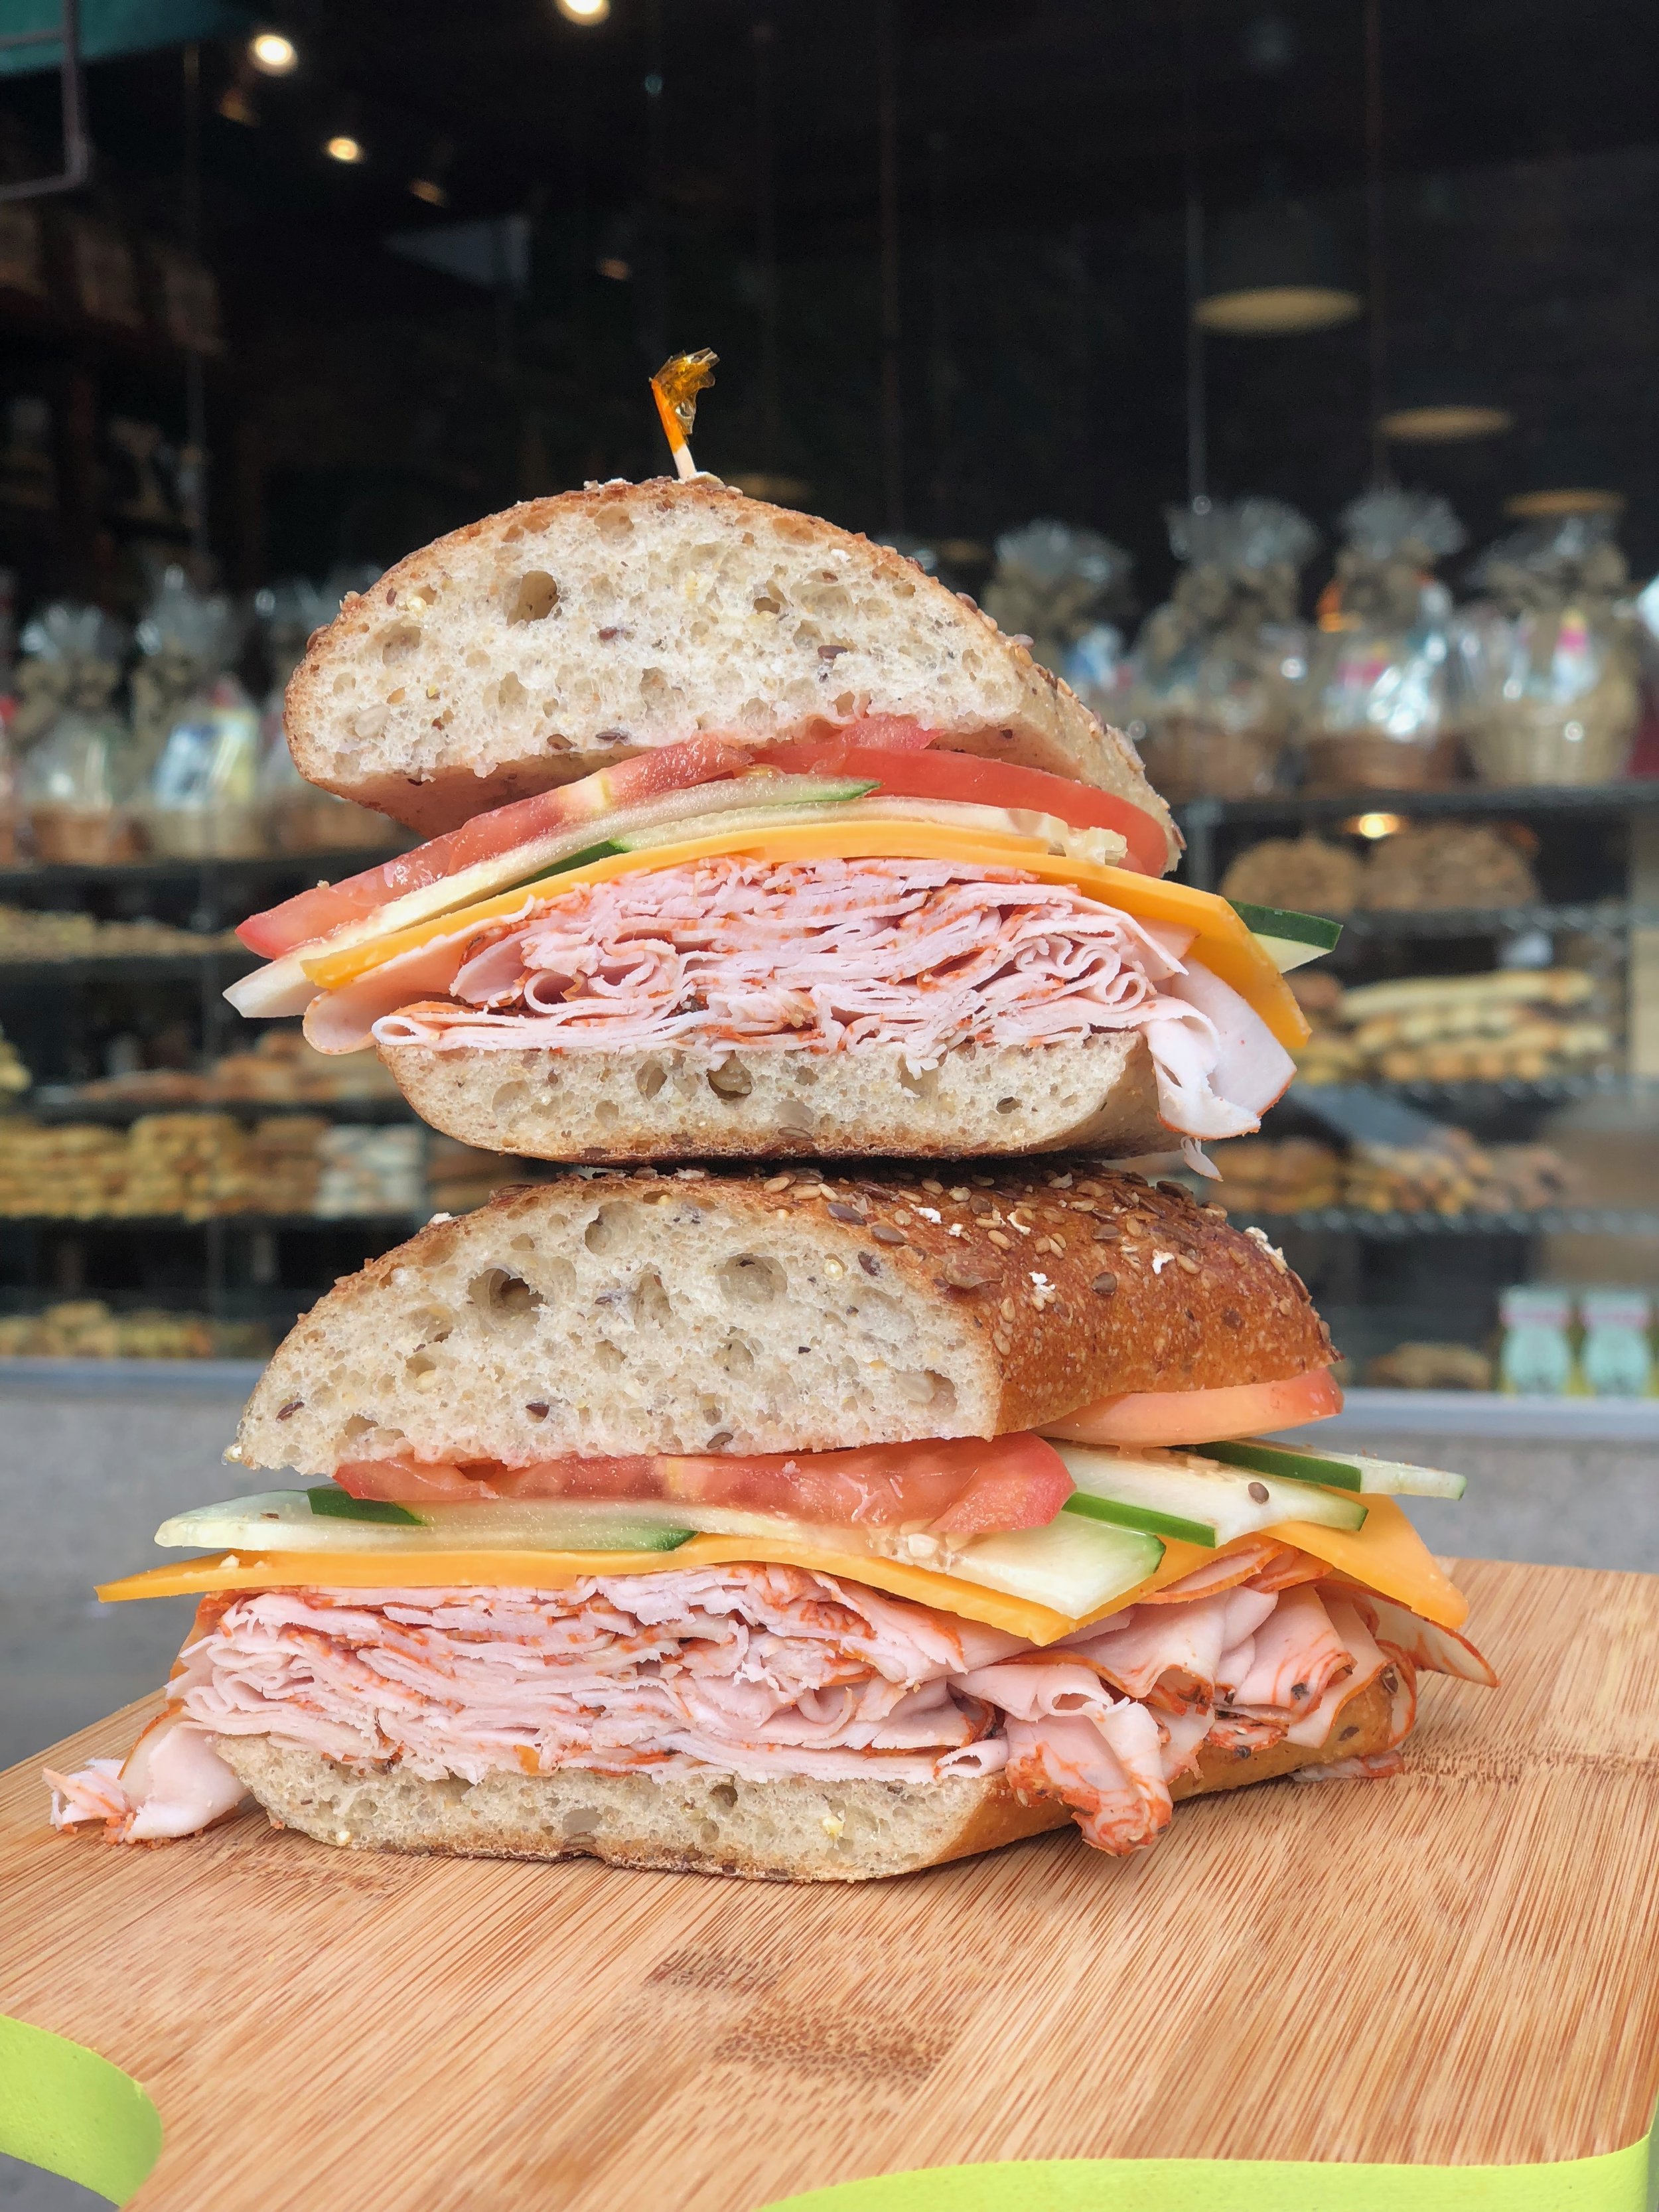 Sandwiches Sandwiches Catering Italian Imported Food In Nyc